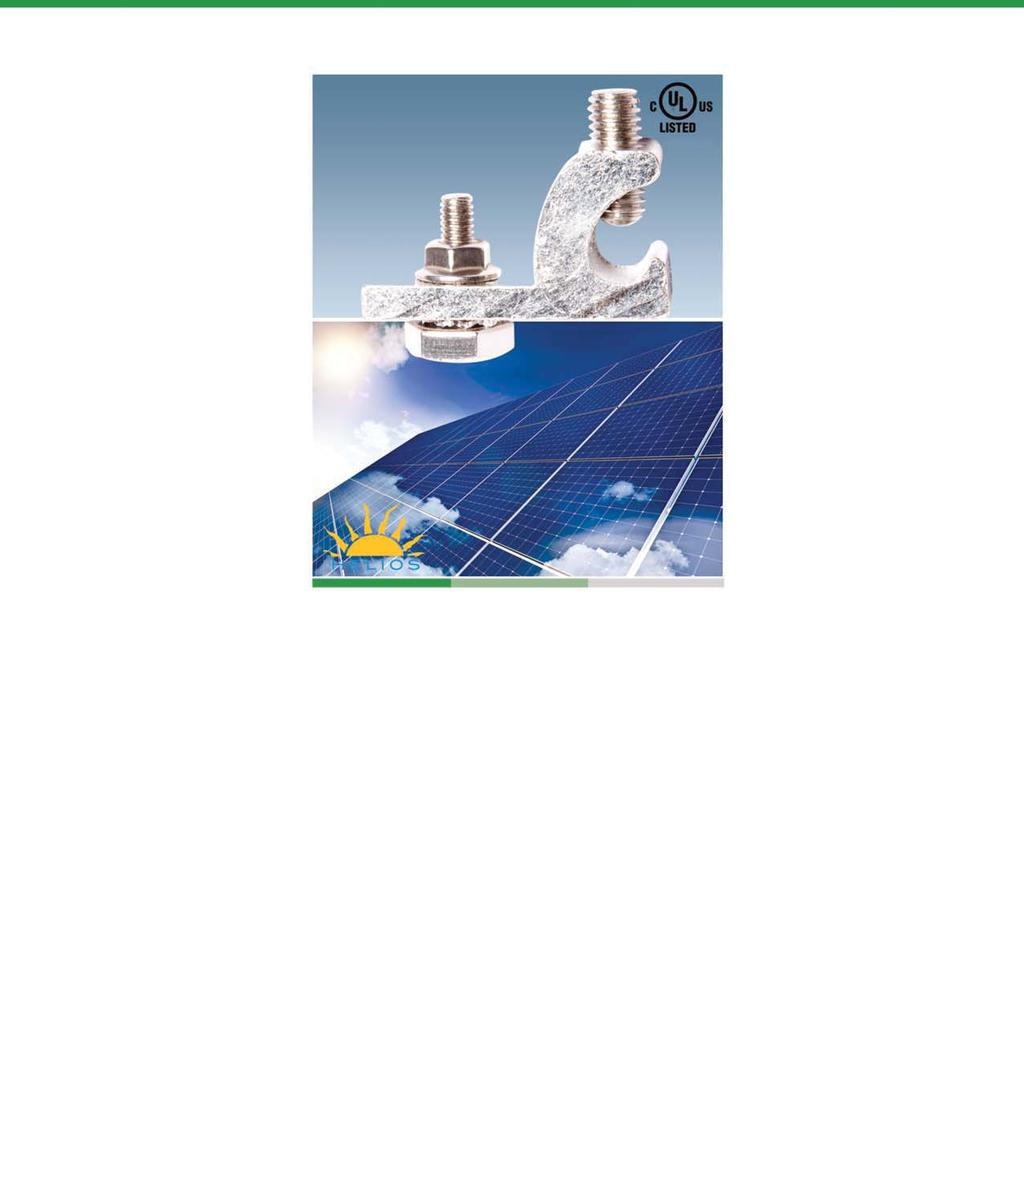 Amphenol IDS-52-2 UL2703 HelioLug Amphenol Industrial Solar Technologies (AIST) offers products and solutions for all segments of the solar electric system.